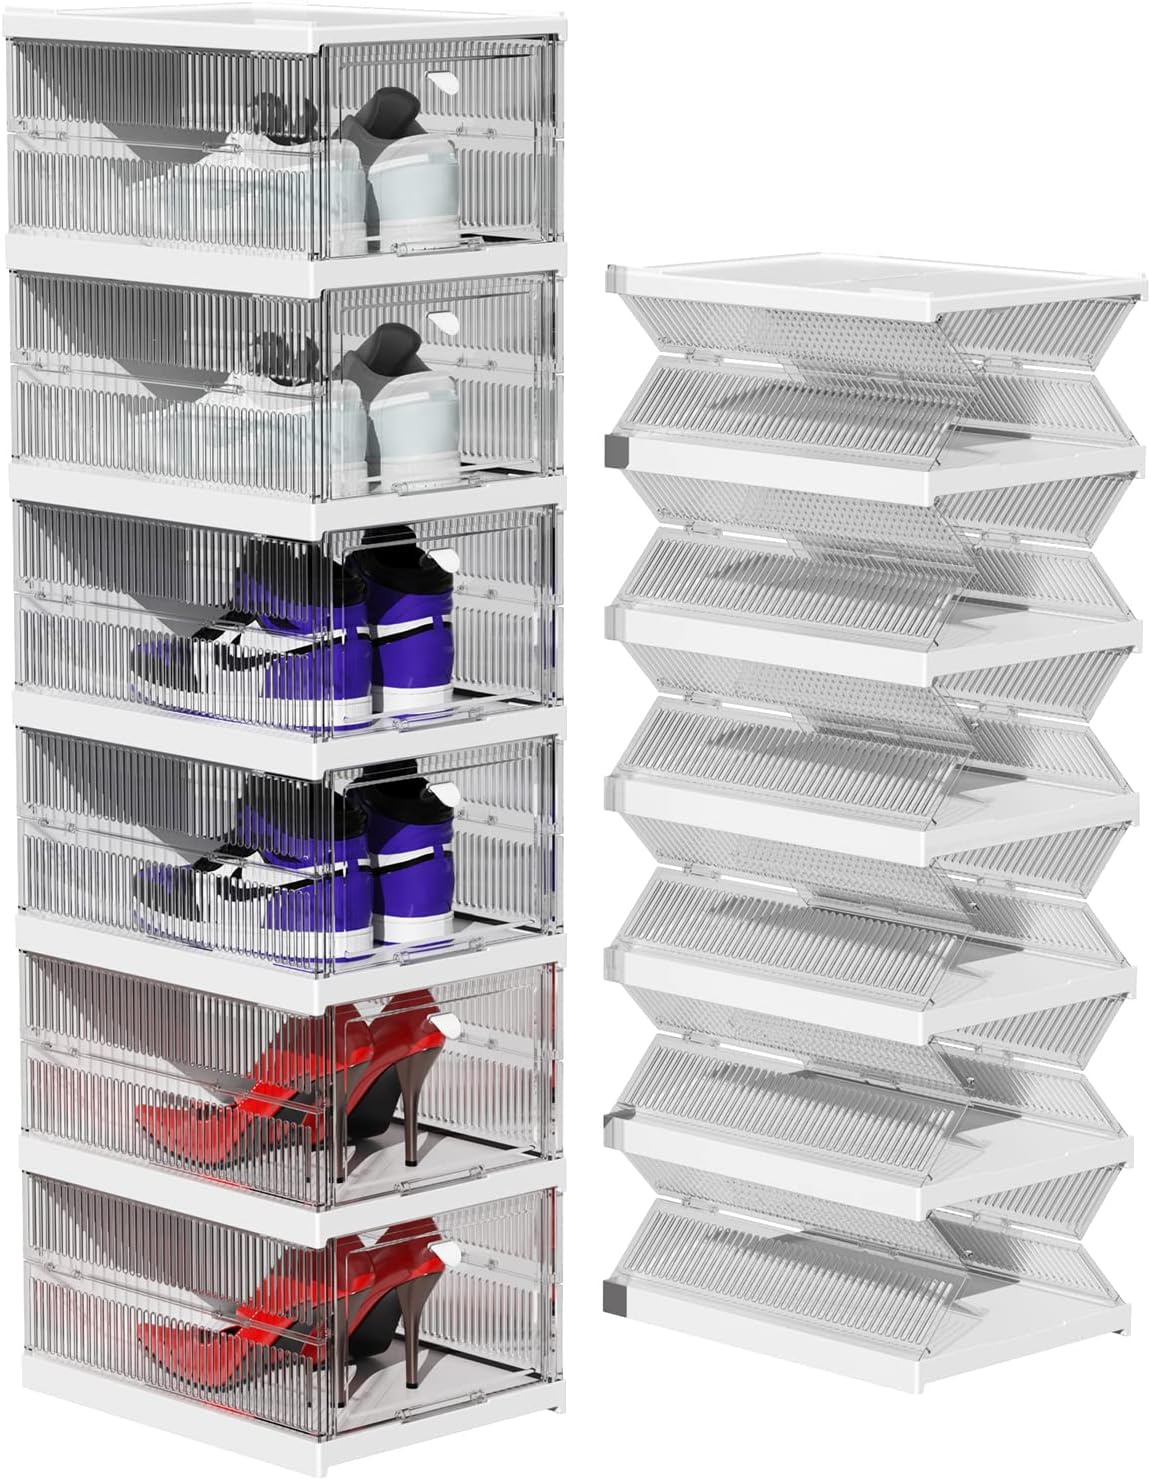 Shoe Boxes Clear Plastic Stackable, Shoe Storage Organizer Boxes Easy Installation All in One Shoe Box with Doors 6 Tier Foldable Shoe Box Space Saving for Closet Entryway Containers Bins